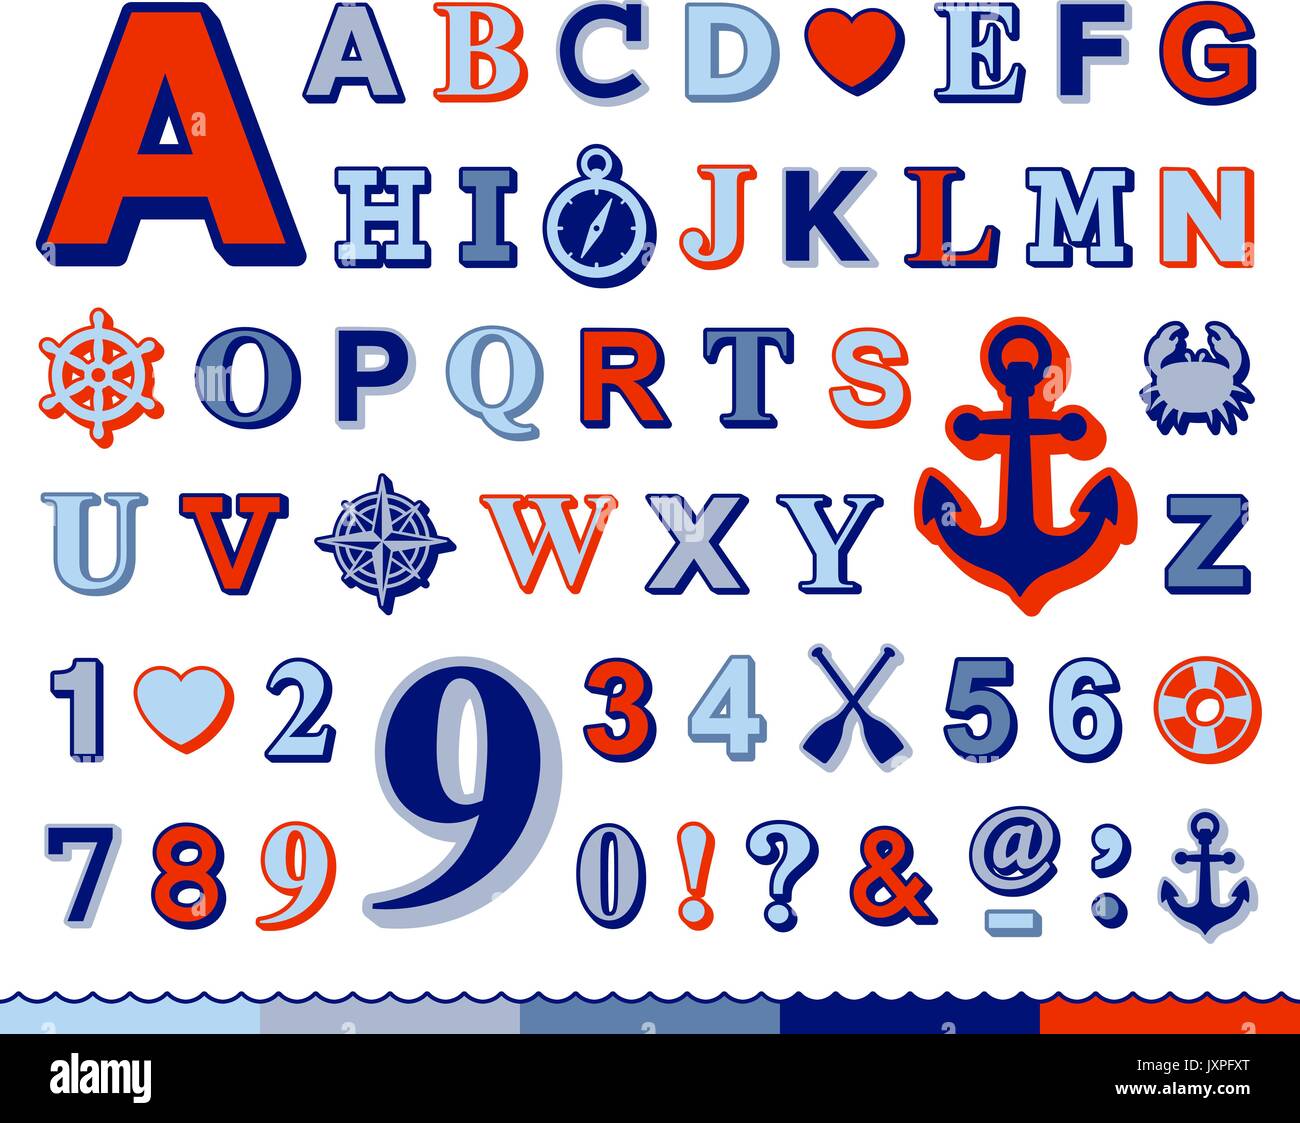 Complete marine alphabet and number set in upper case design with red and blue font and a ships wheel, anchor, crab, compass, preserver and heart naut Stock Vector